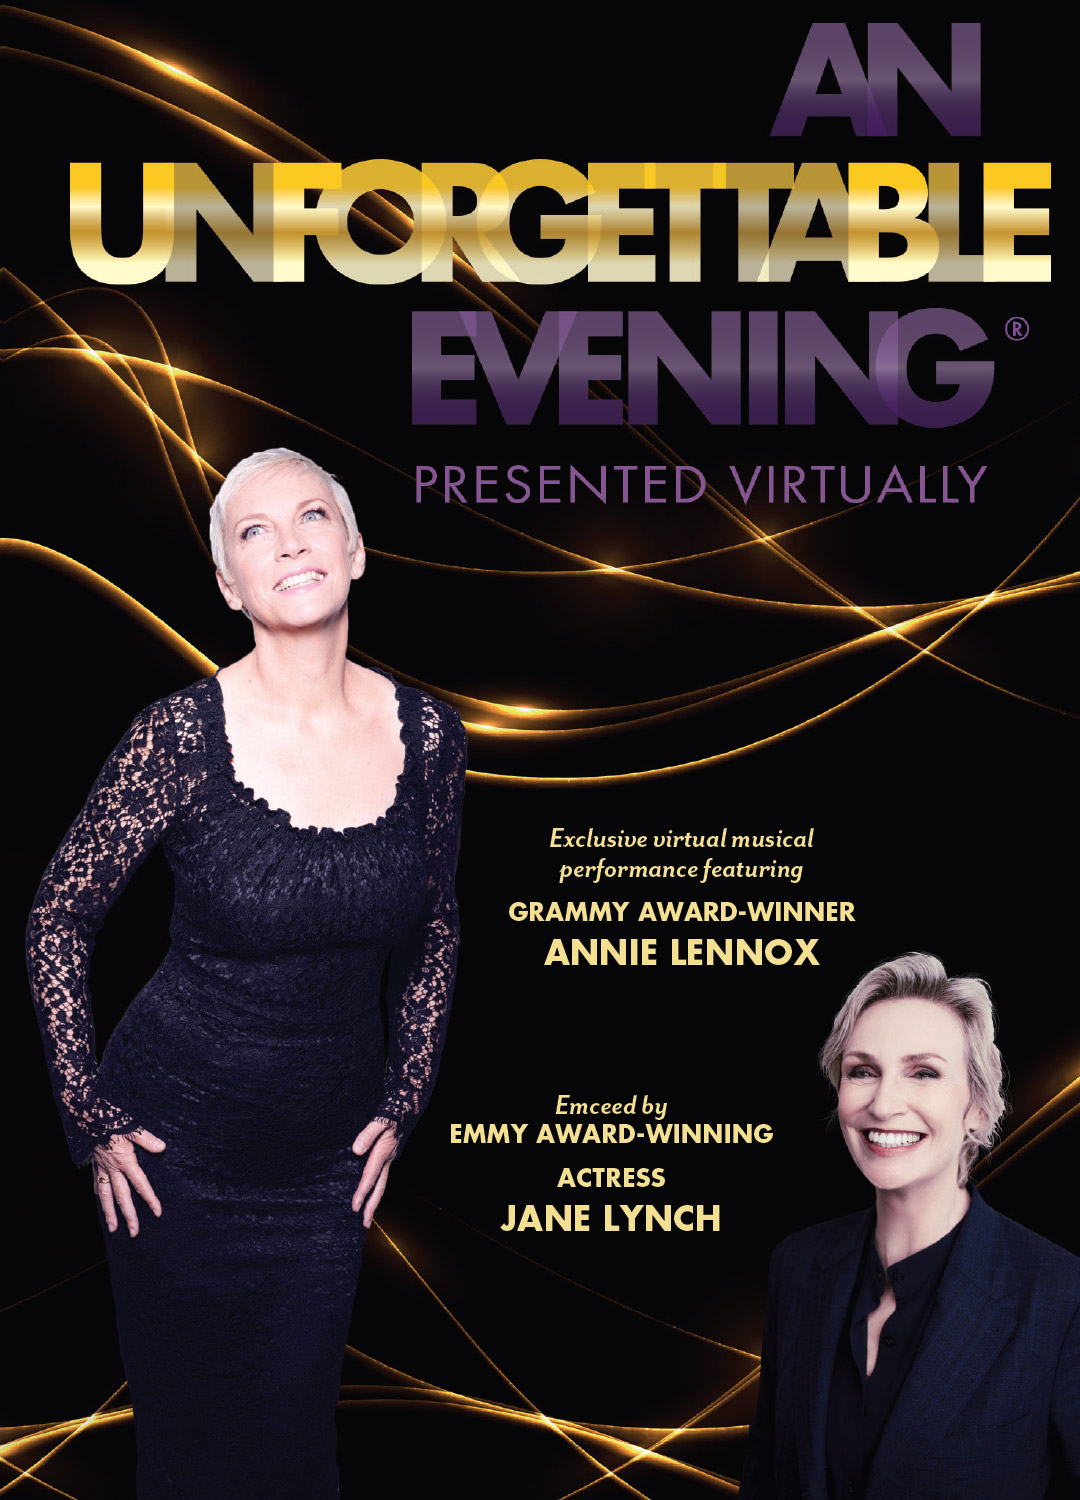 cover of An Unforgettable Evening 2021 invitation - with photos of Annie Lennox and Jane Lynch